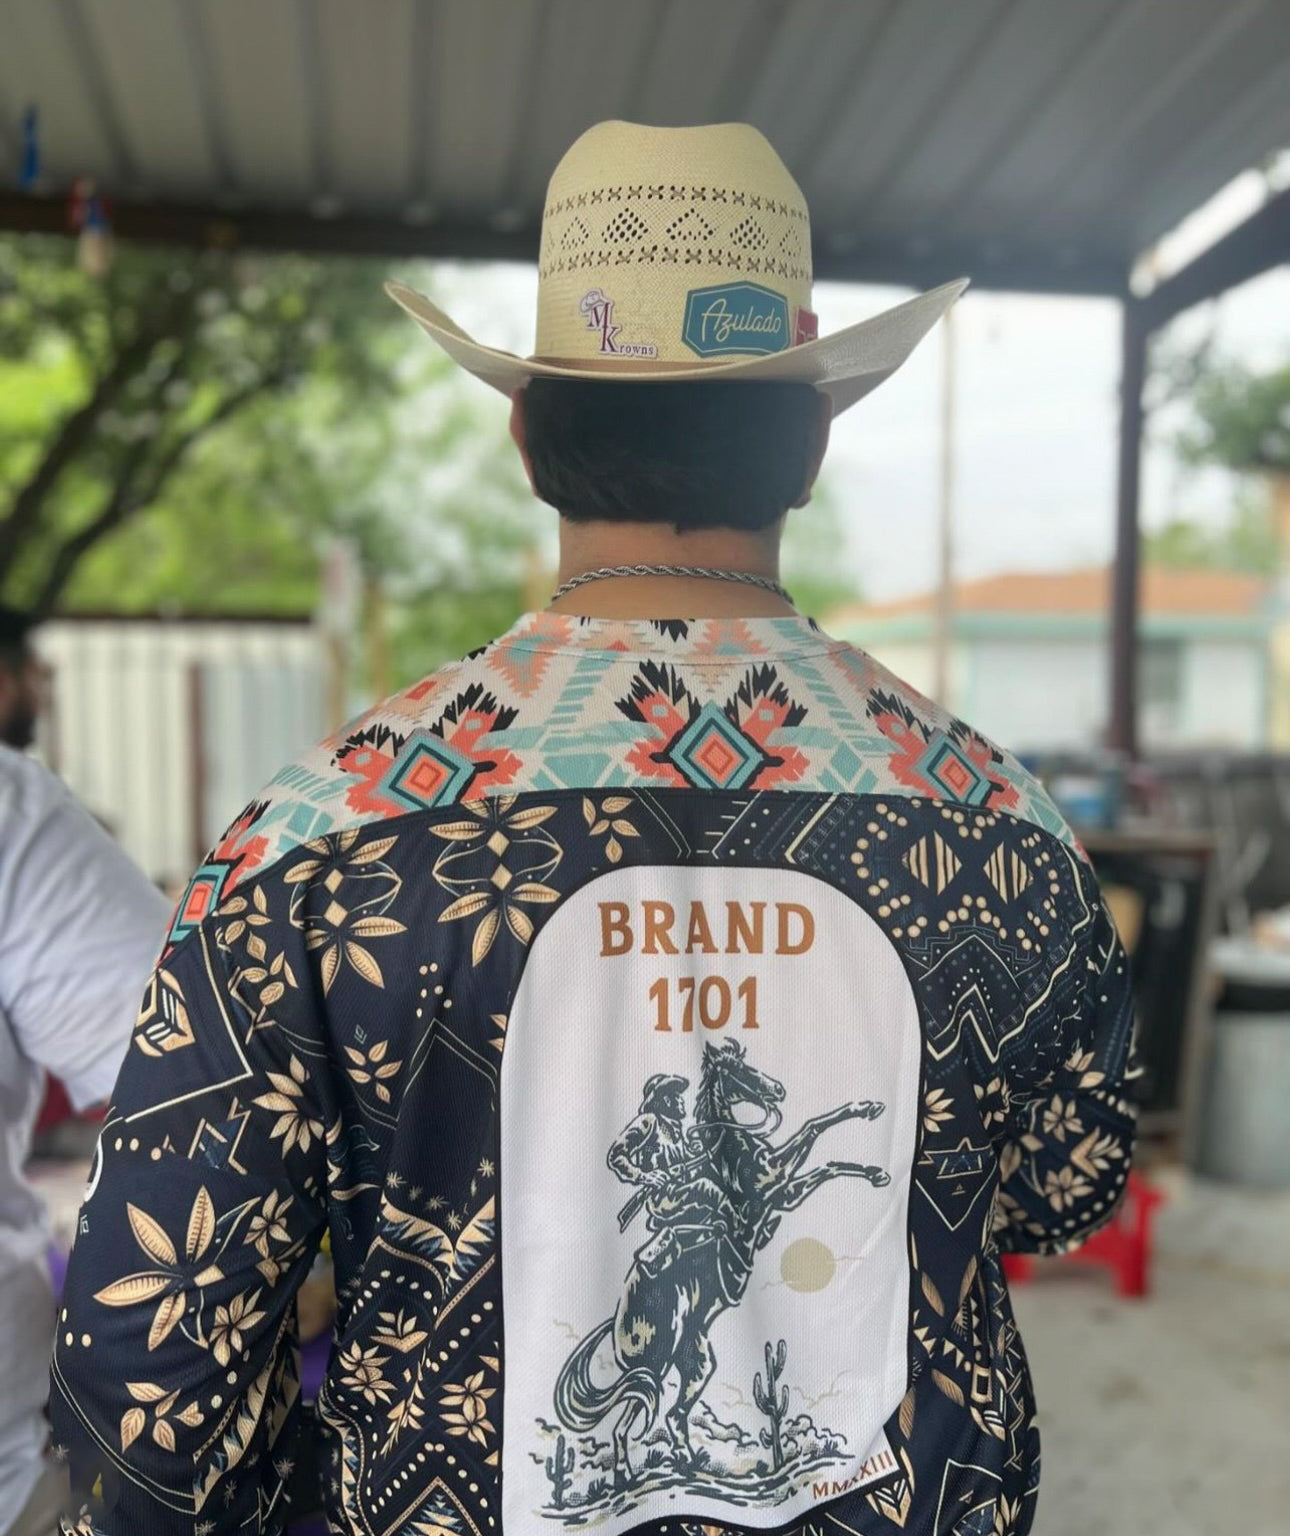 1701 Rodeo Jersey